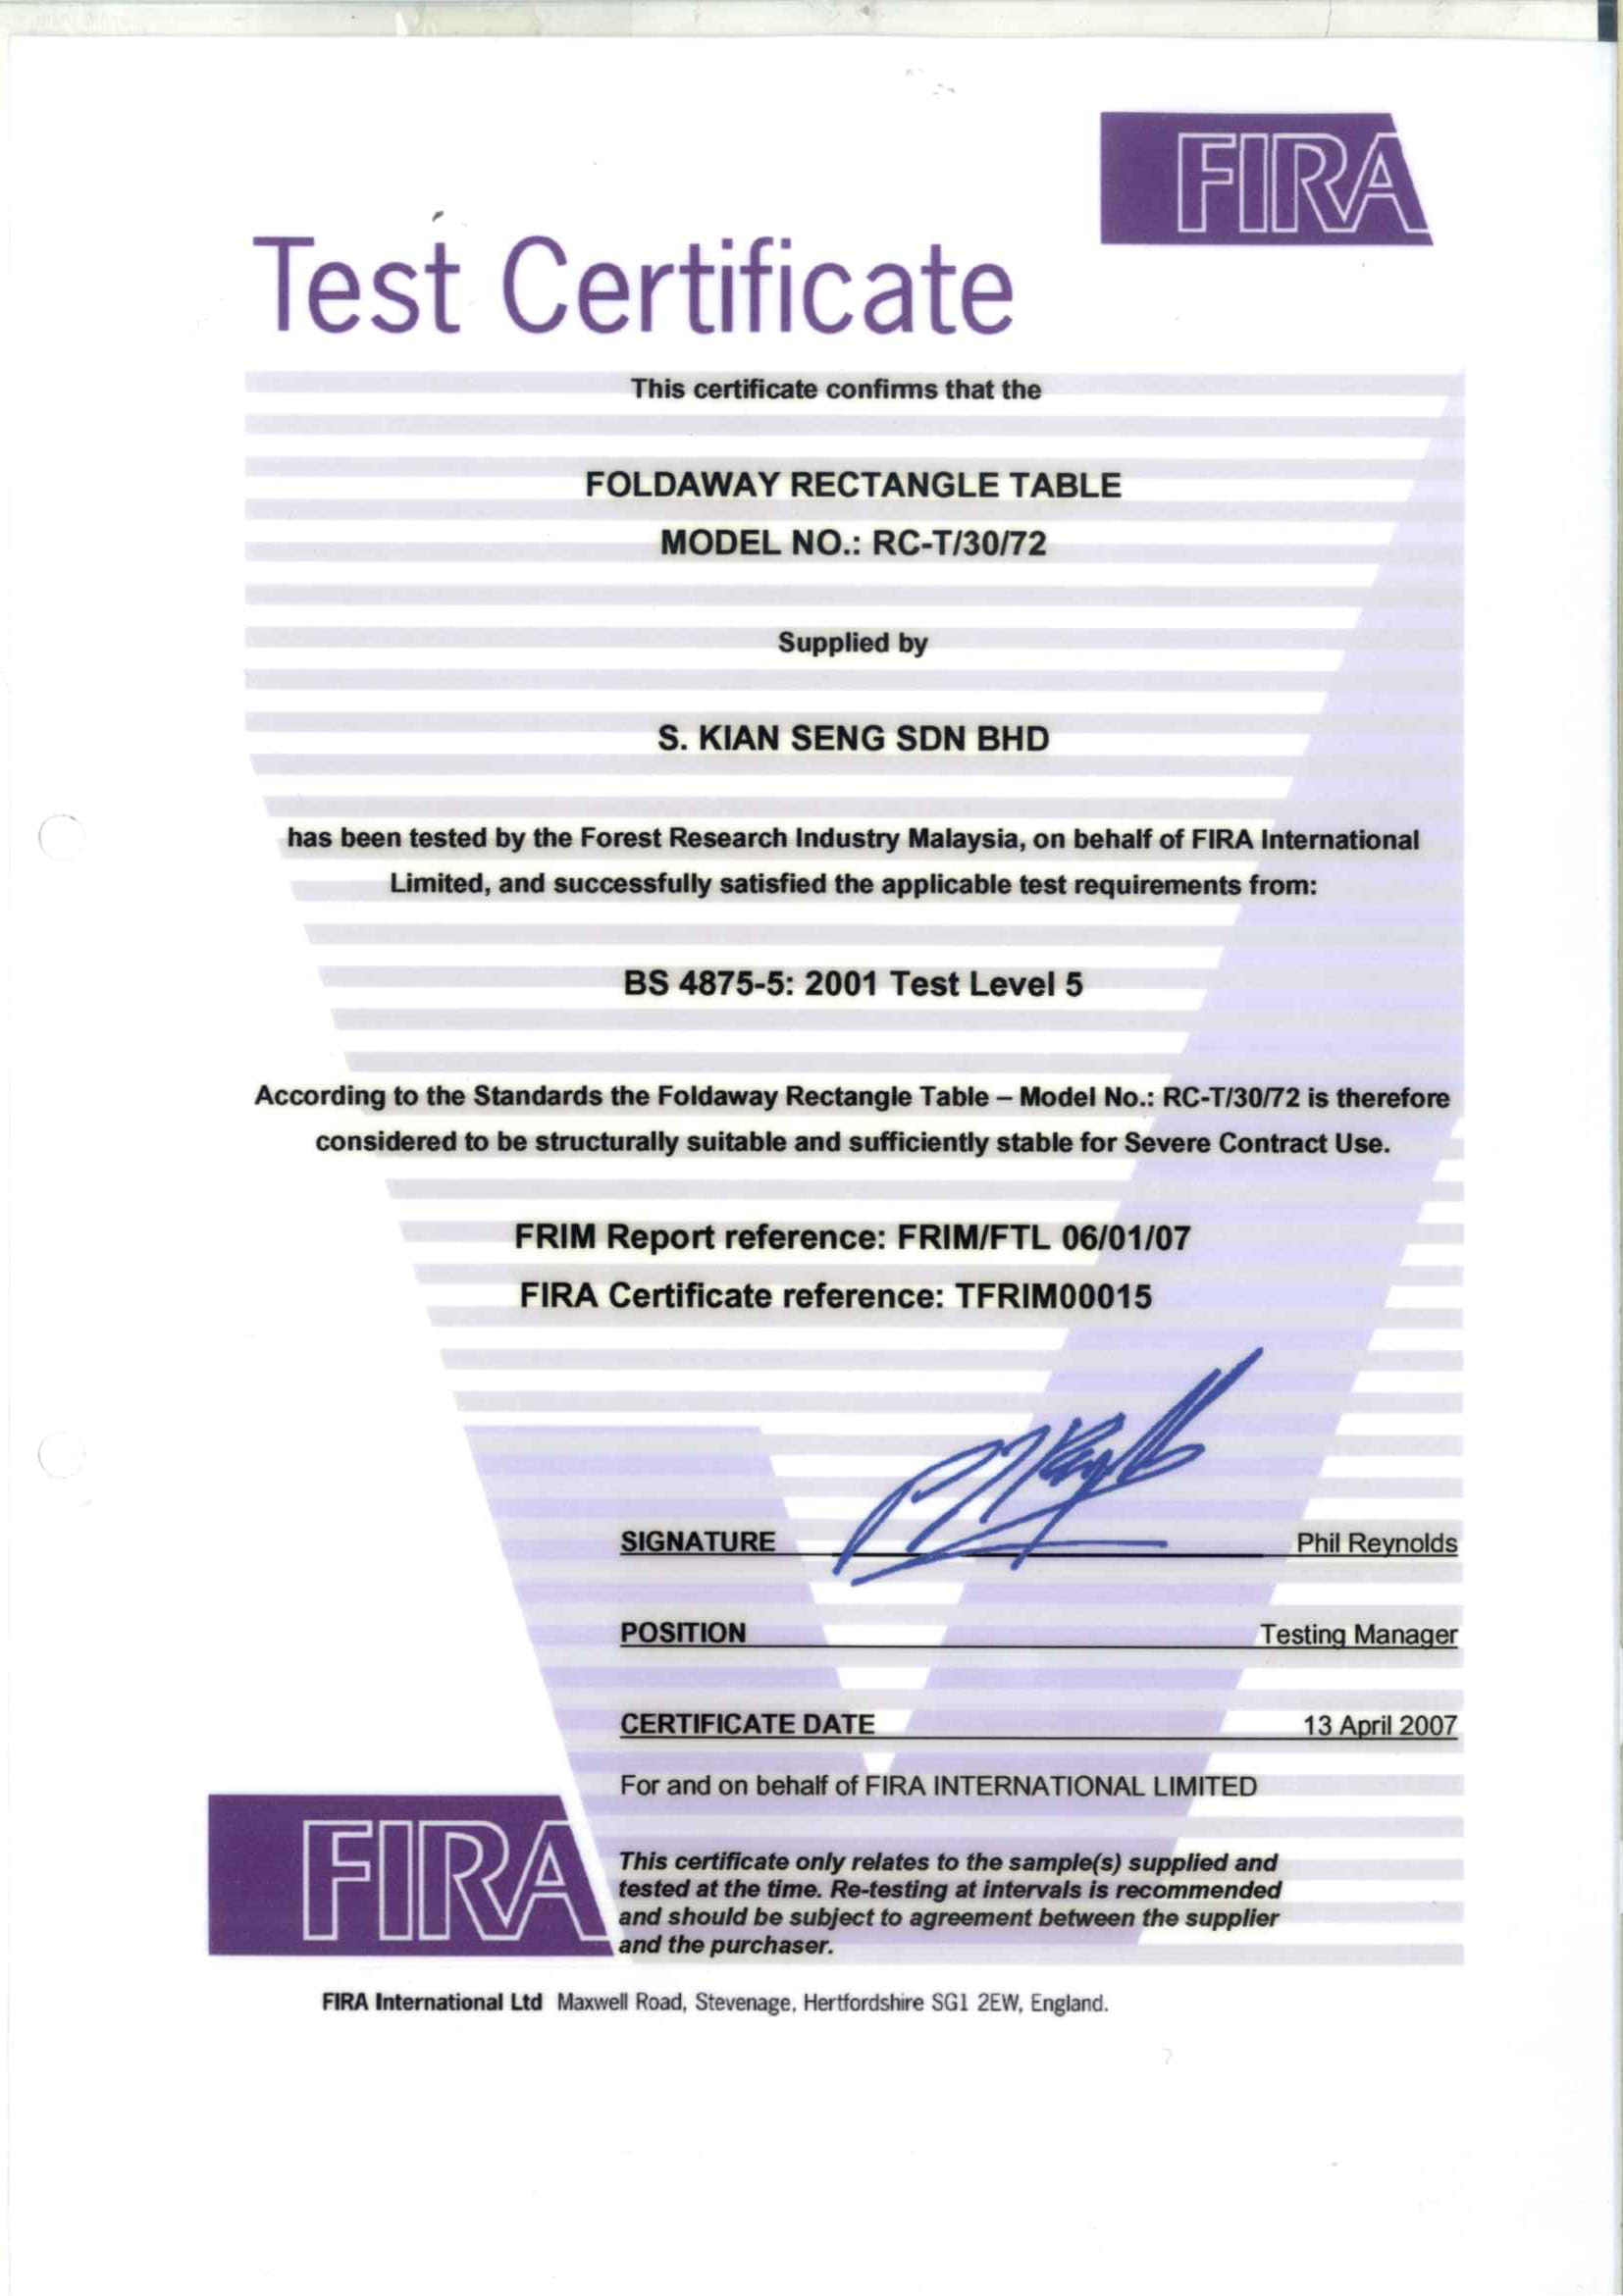 Test Certificate by FIRA - Foldaway Rectangle Table RC-T/30/72 (BS 4875-5: 2001 Test Level 5)